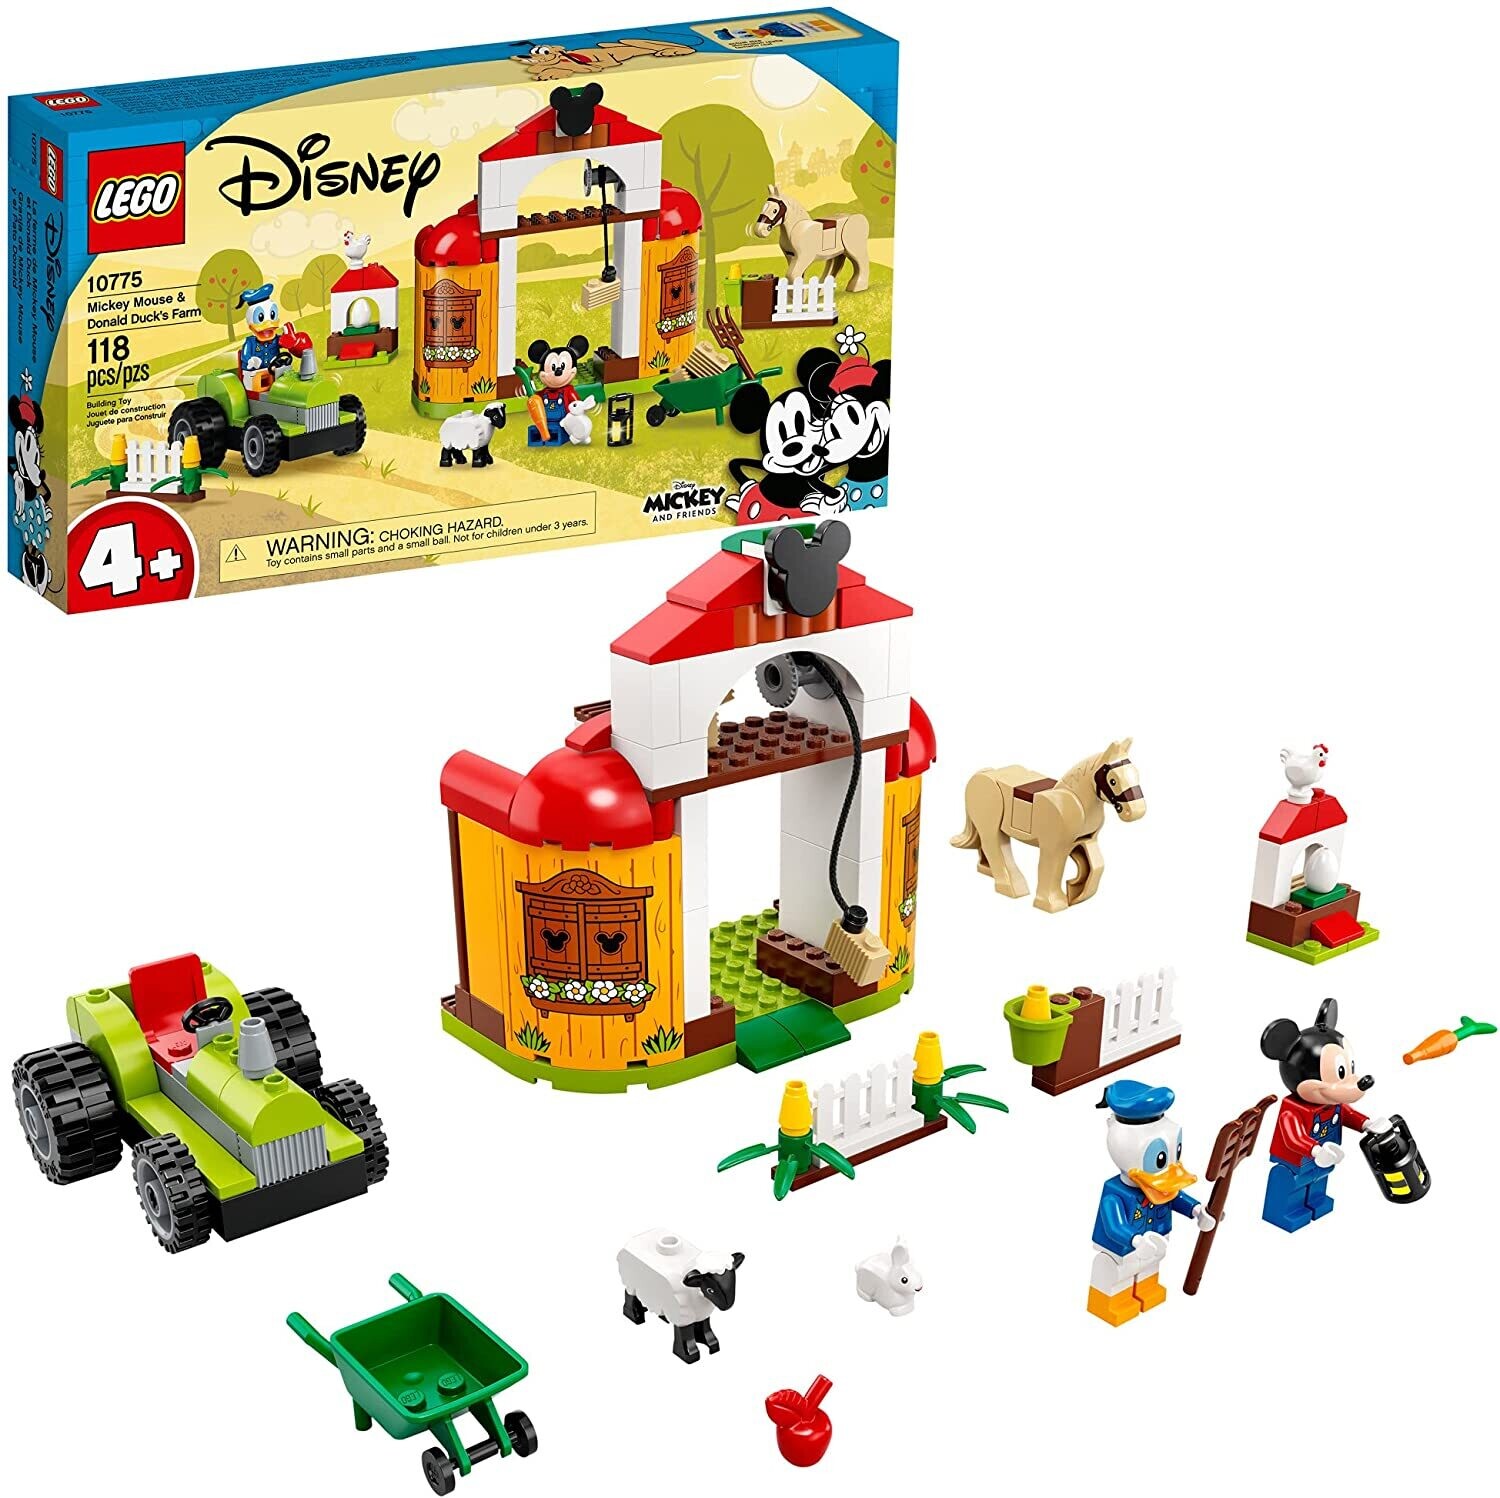 LEGO 10775 Mickey Mouse and Donald Duck's Farm